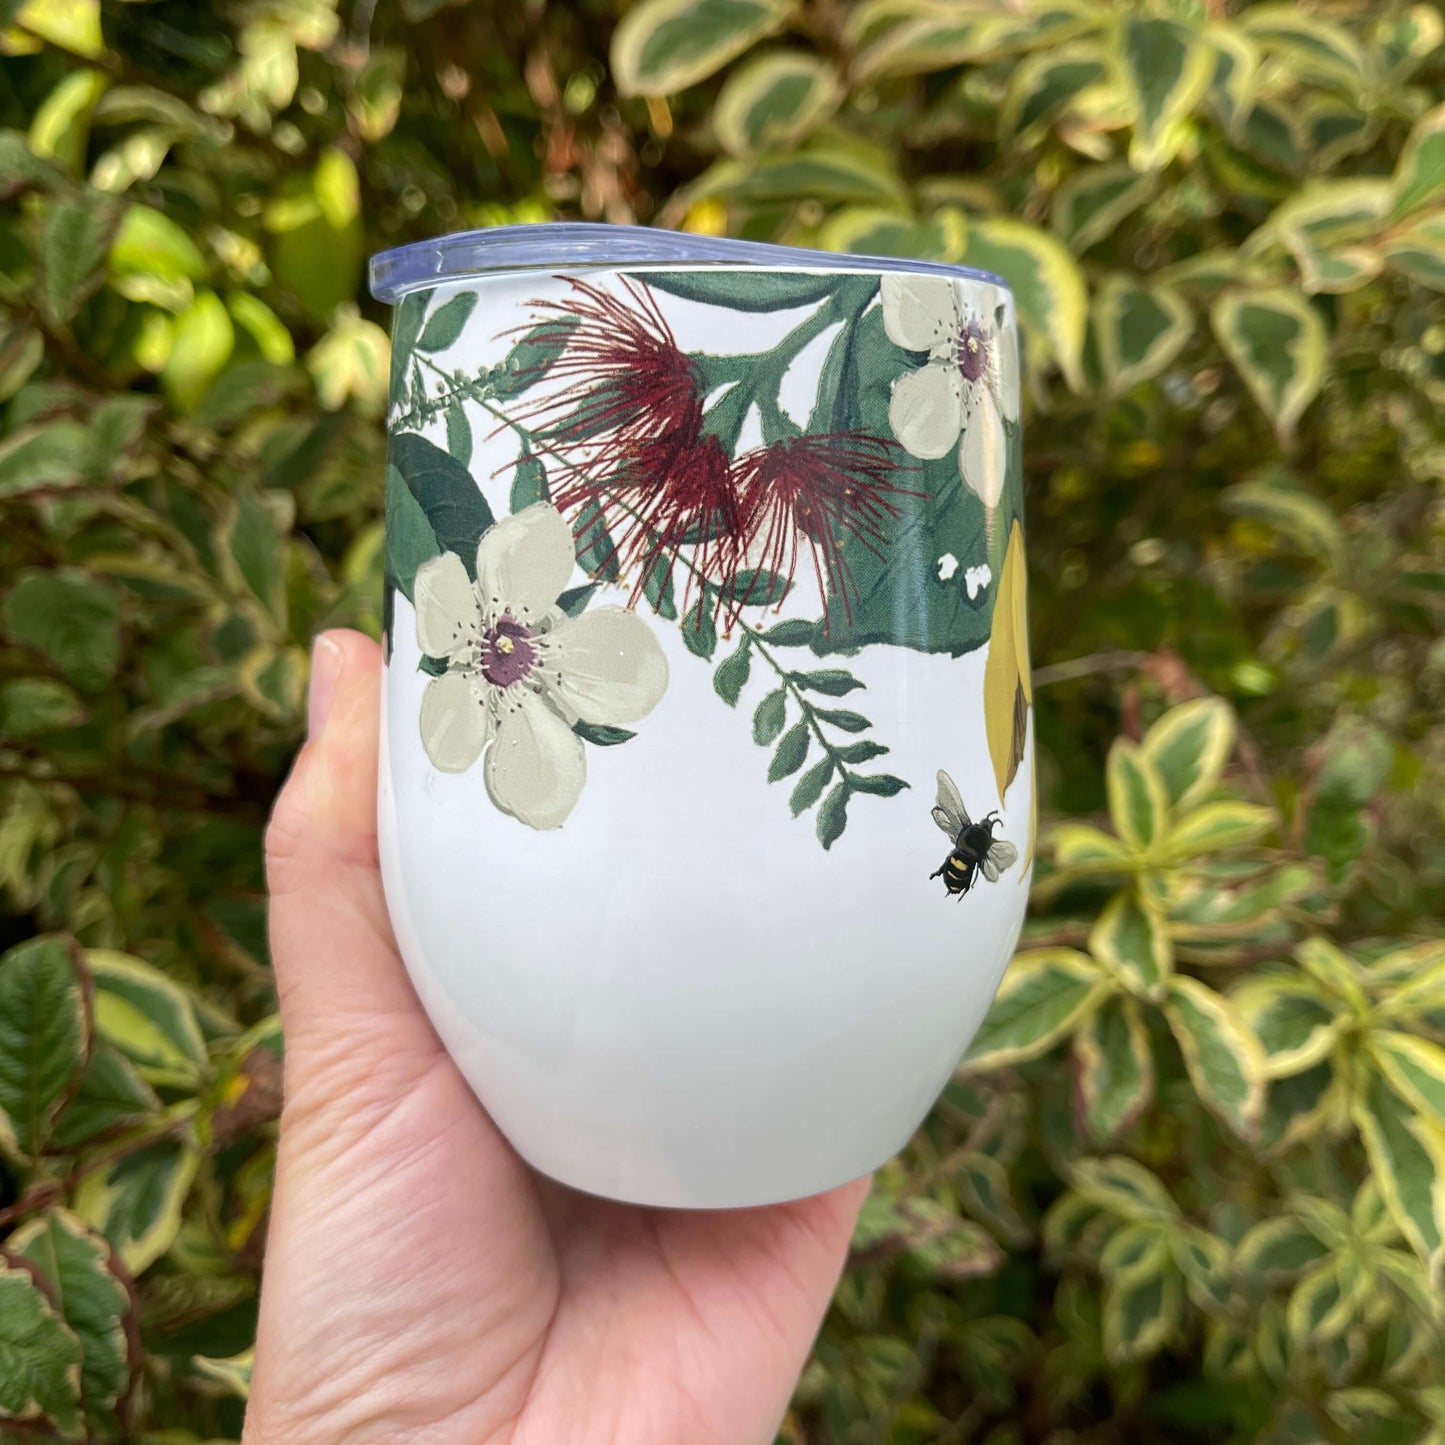 Stainless steel mug painted white with a floral design around the top half of the mug.